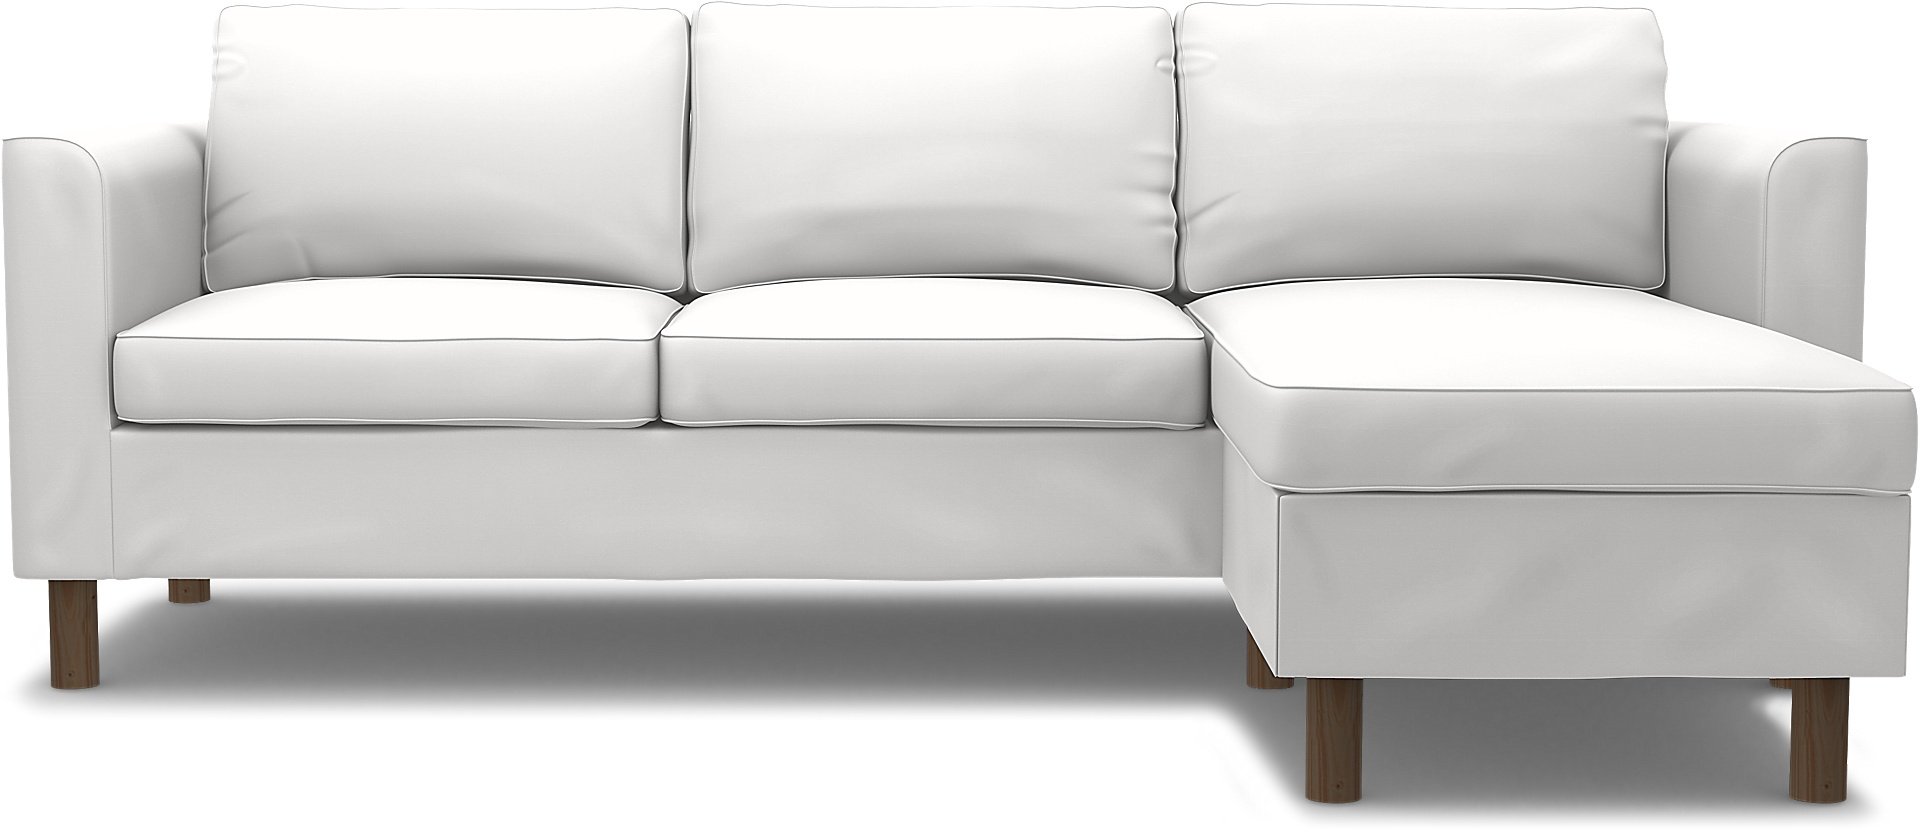 IKEA - Parup 3 Seater with chaise longue, Absolute White, Cotton - Bemz